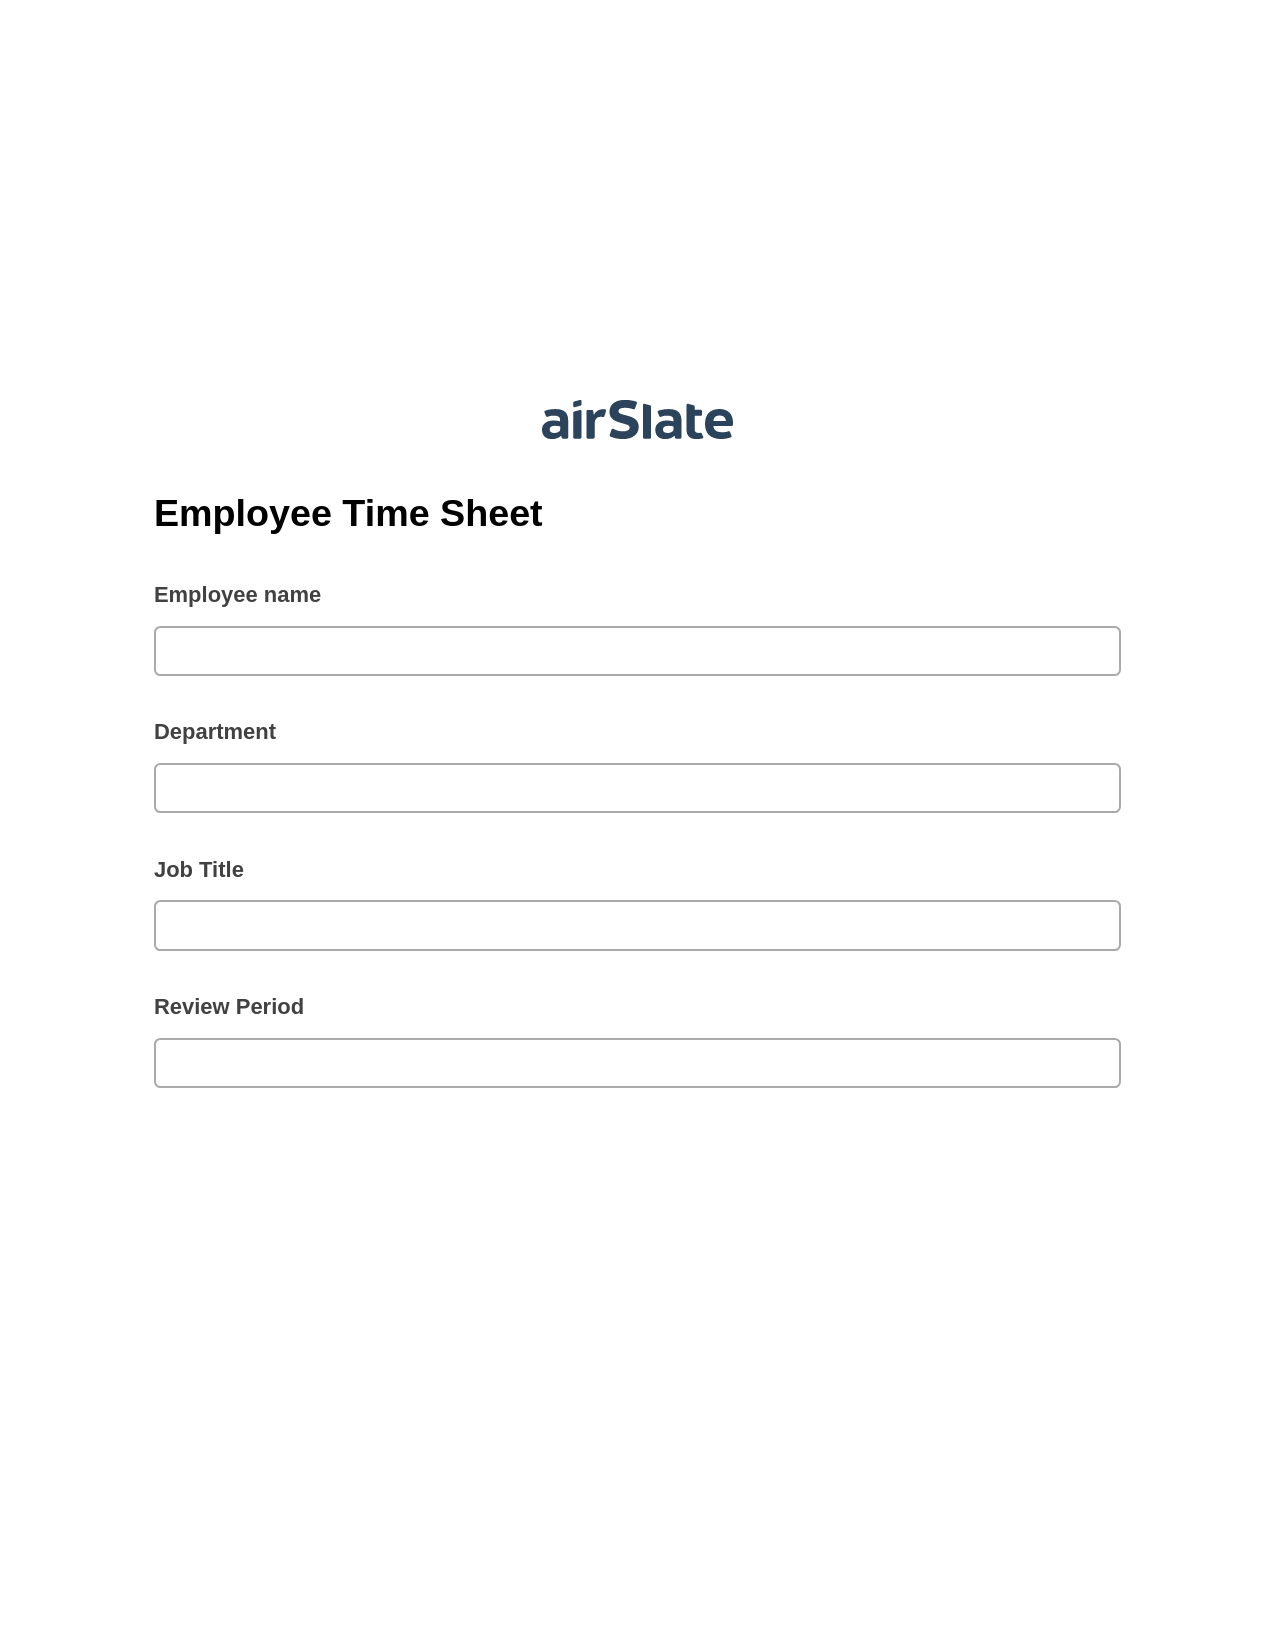 Employee Time Sheet Pre-fill from Salesforce Records Bot, Update Audit Trail Bot, Email Notification Postfinish Bot